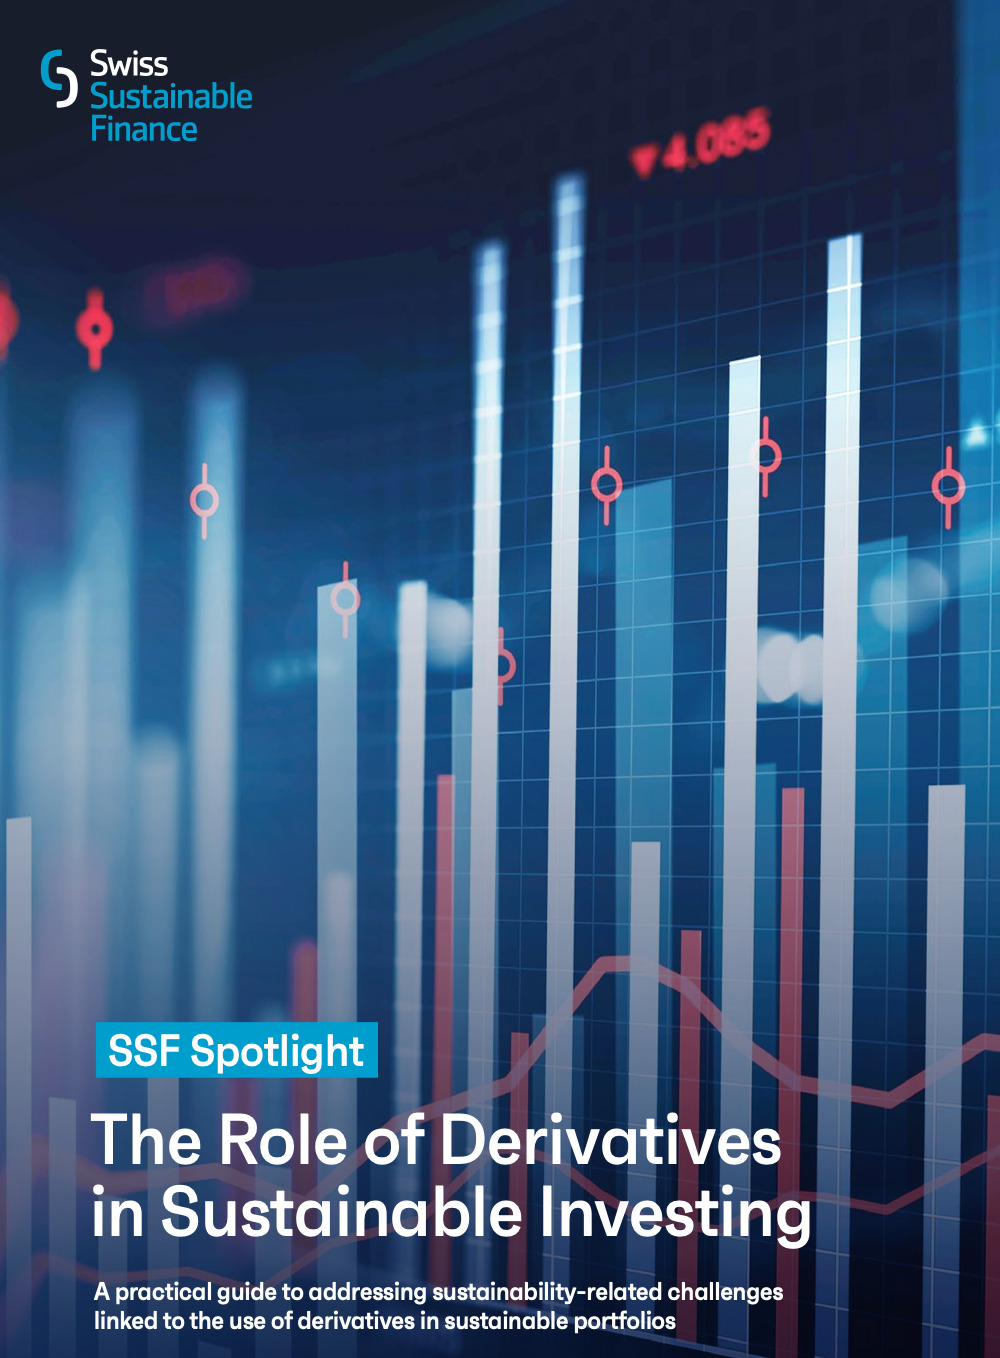 The Role of Derivatives in Sustainable Investing